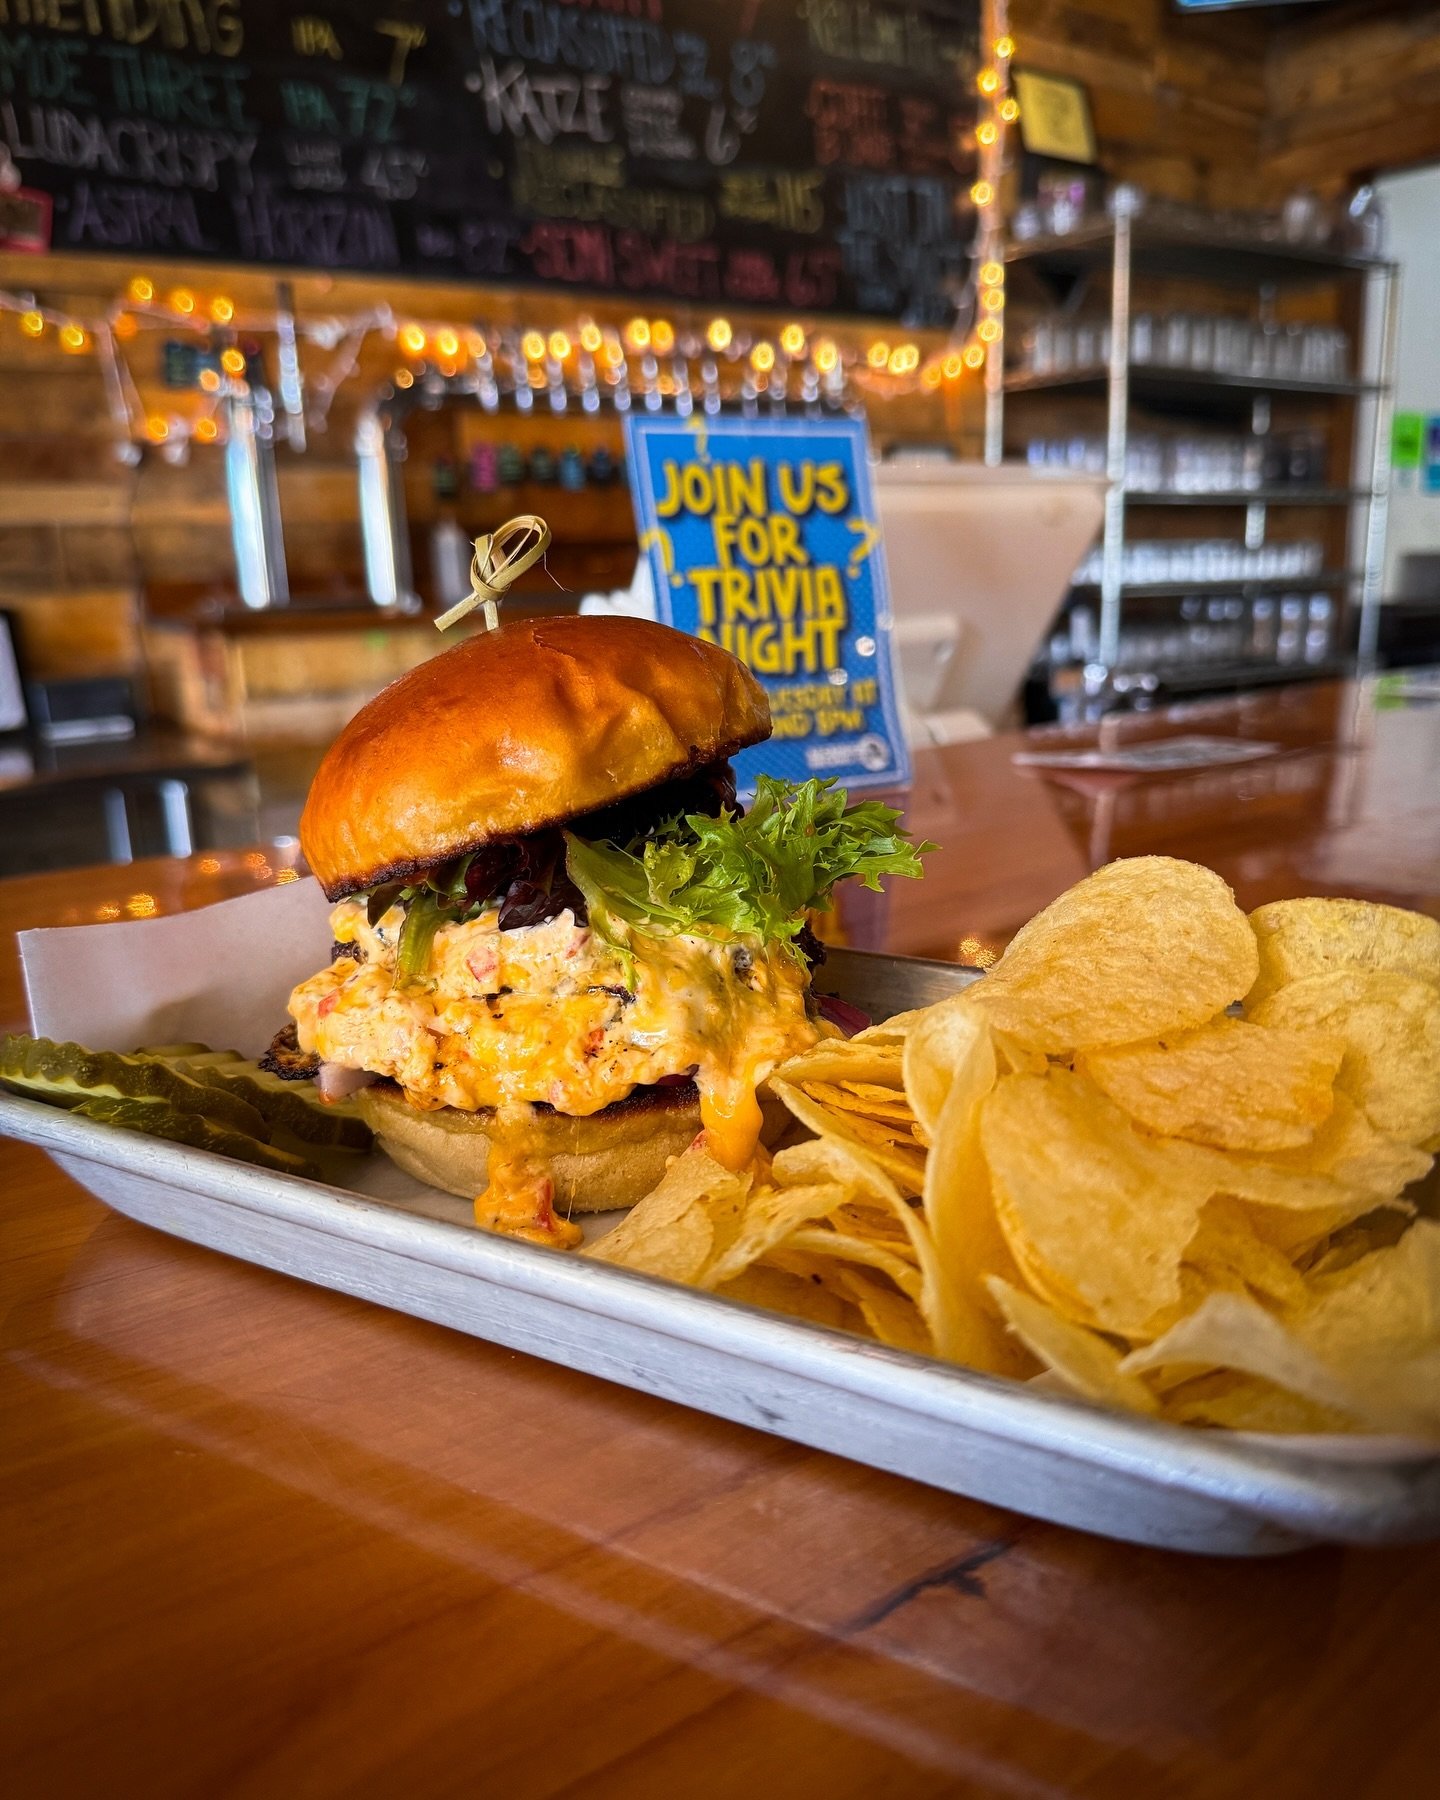 😍😍 AND ANOTHER ONE! 😍😍

We&rsquo;ve got a 🍔🍔 PIMENTO CHEESE BURGER 🍔🍔we&rsquo;re featuring all week (while supplies last)! This bad boy is 7oz of Prime Beef Patty, smash-style, absolutely SMOTHERED in Pimento Cheese and topped with lettuce, k